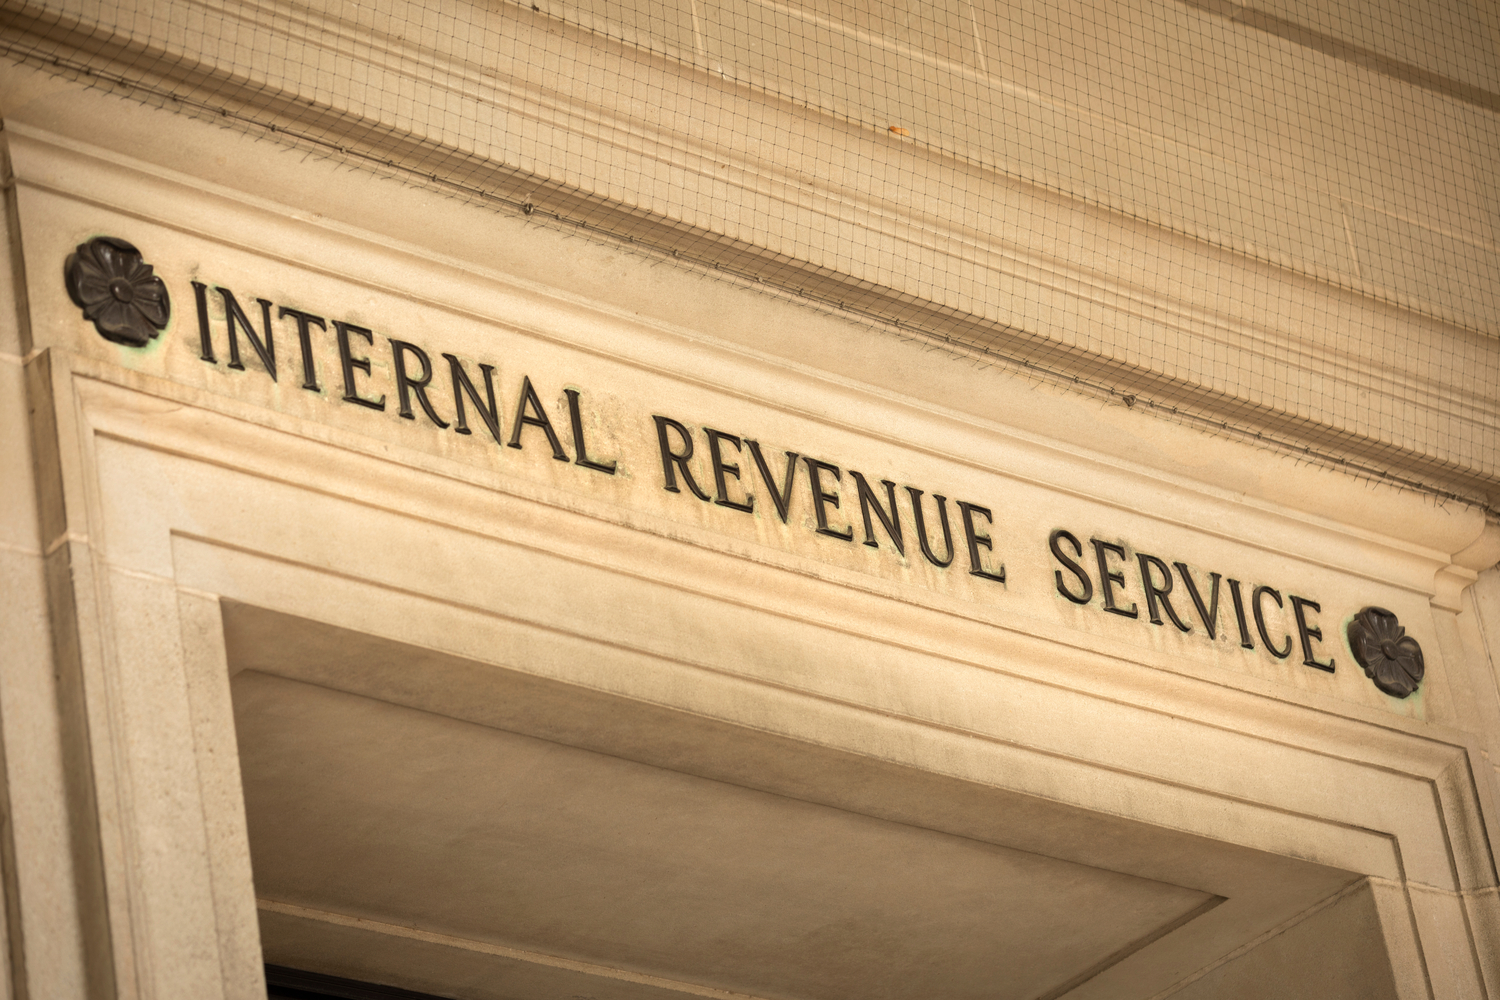 IRS Seeks Elliptic’s Crypto Tracing Software program in Response to COVID-19